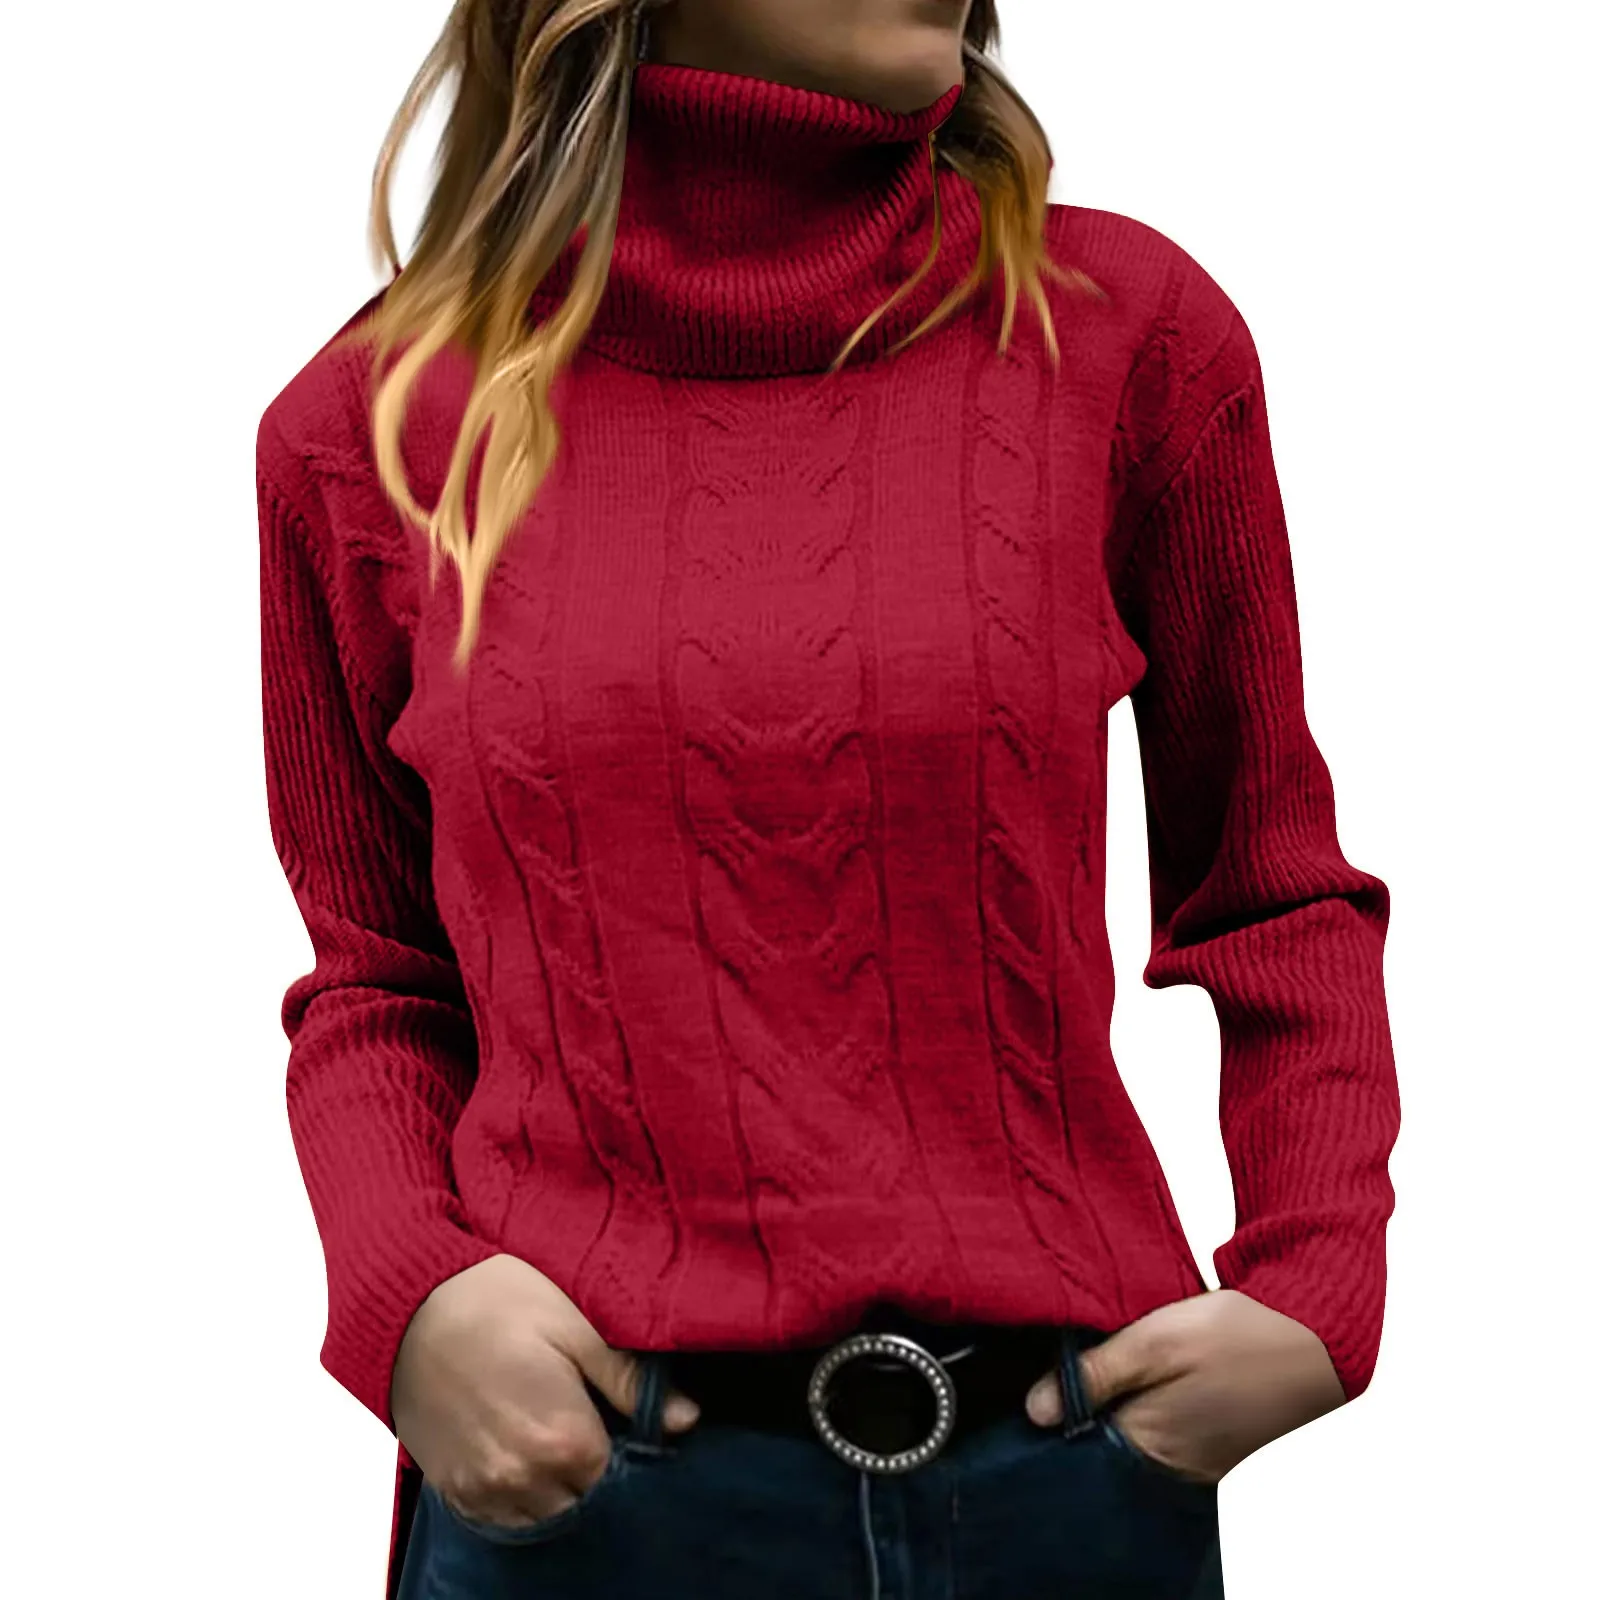 

female sweater Autumn and winter turtleneck slim fitting pullover solid color jumper women's knitting bottom sweater top